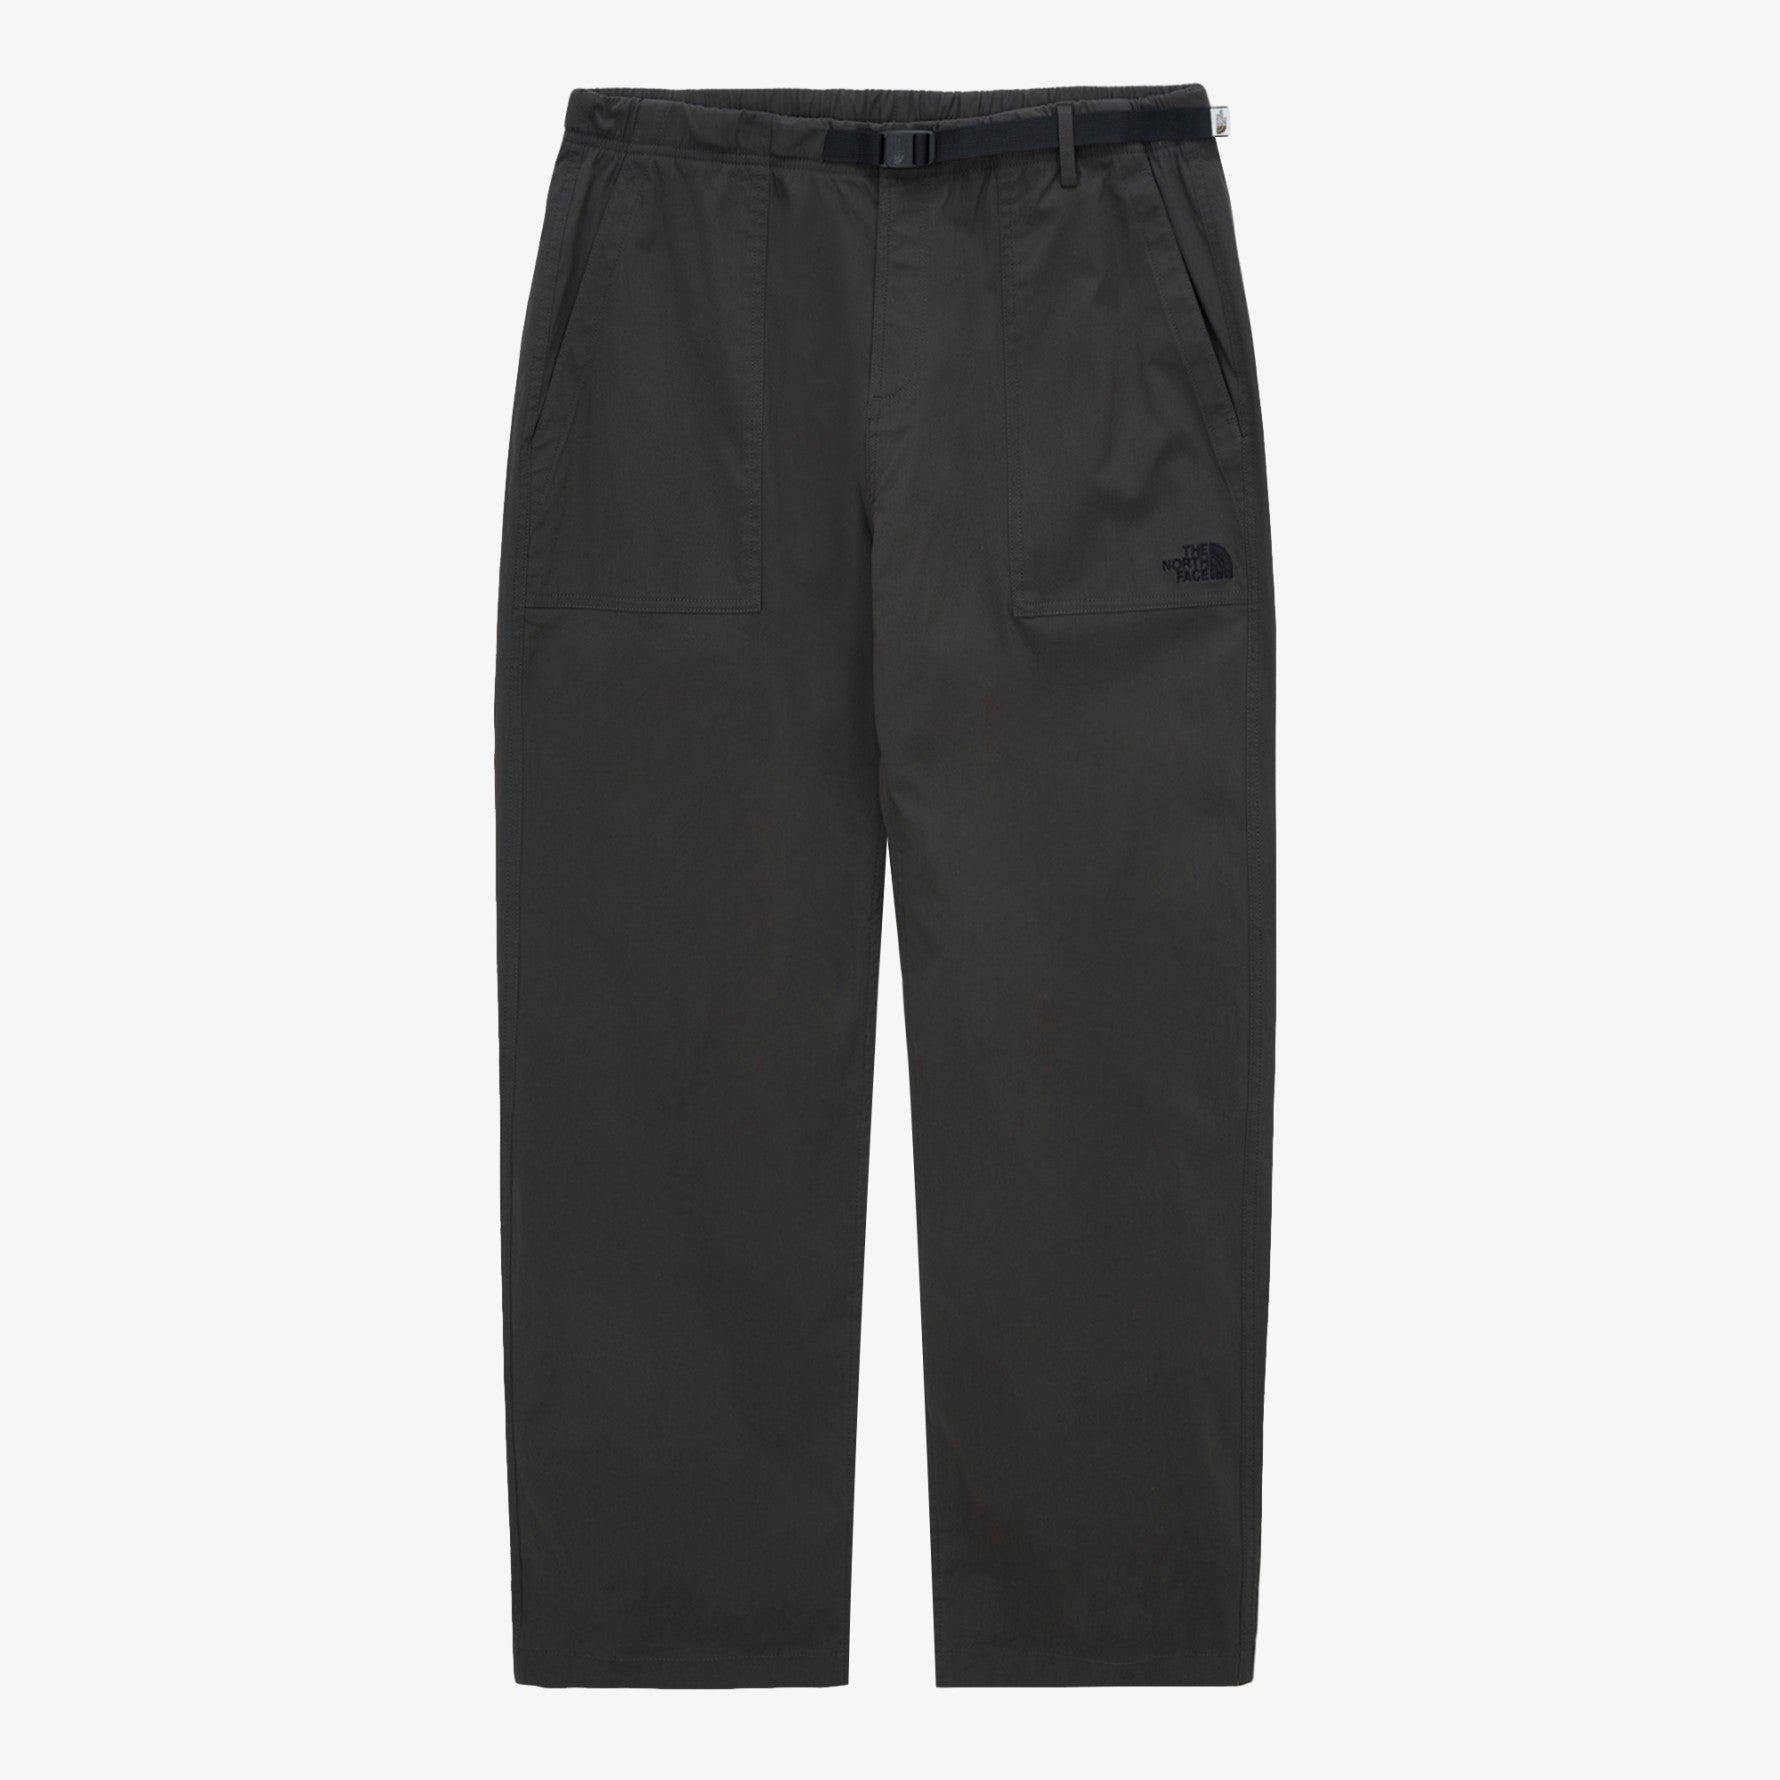 [THE NORTH FACE] COTTONY TAPERED PANTS _ CHARCOAL_GREY(NP6NQ01K) 新商品 - コクモト KOCUMOTO